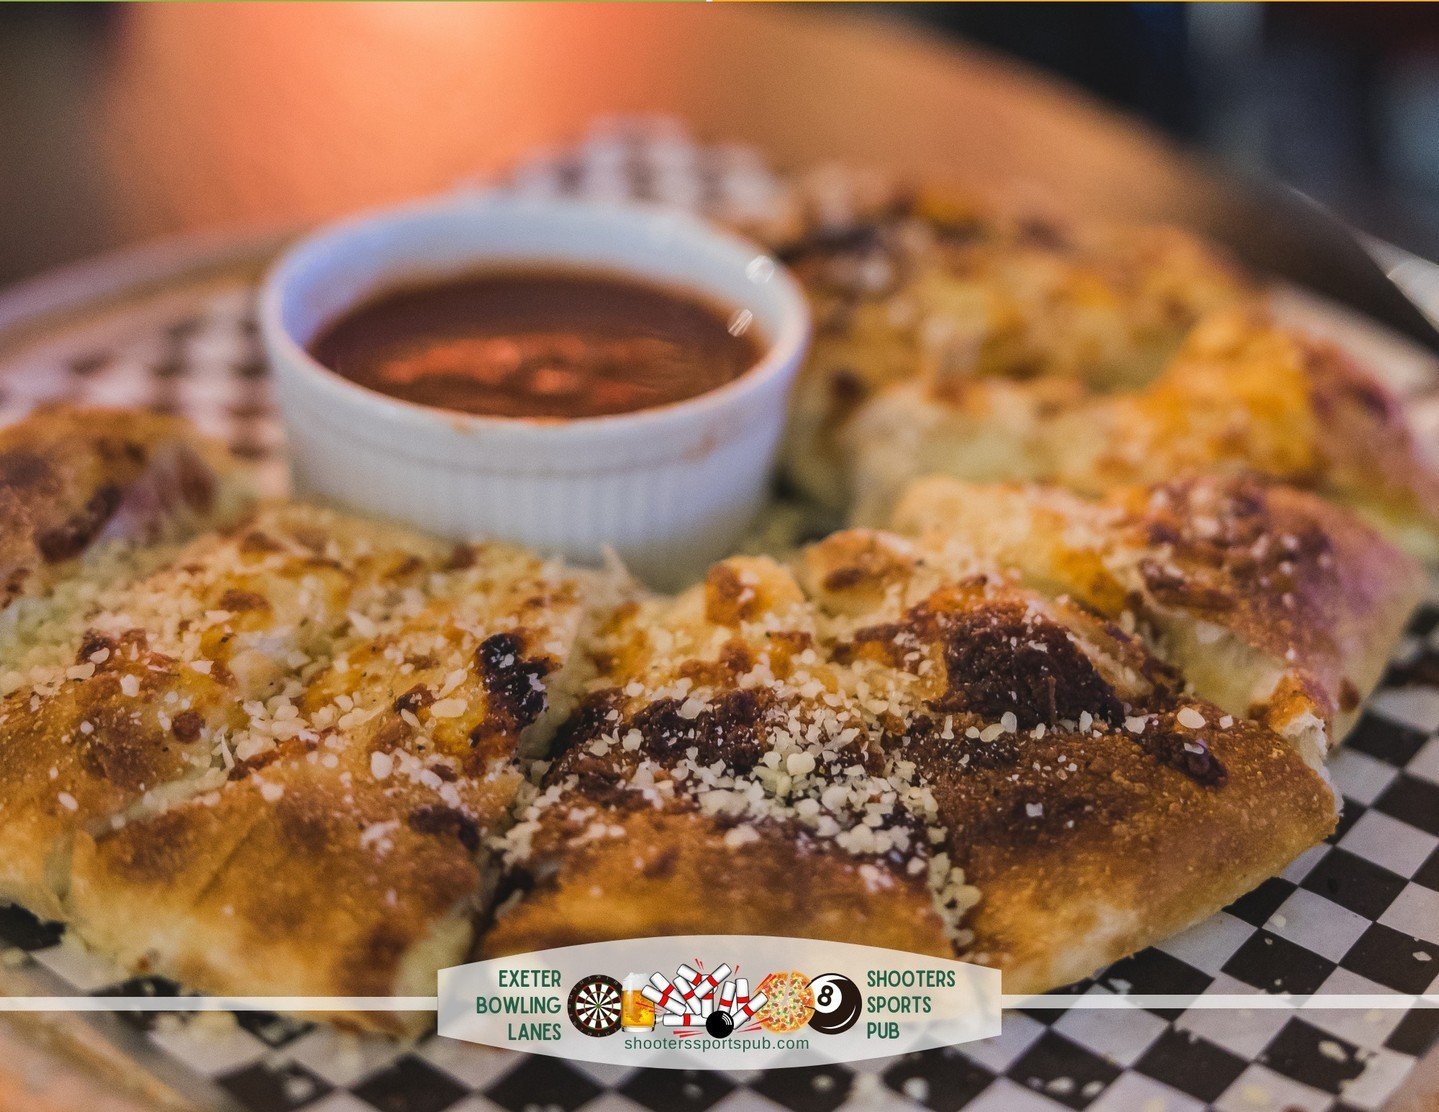 Have you tried this hidden gem? The Rolled Calzone 🌟 You choose your fillings, then dip in marinara or level up with pub cheese! ⁠
⁠
#CalzoneLove #PubEats⁠